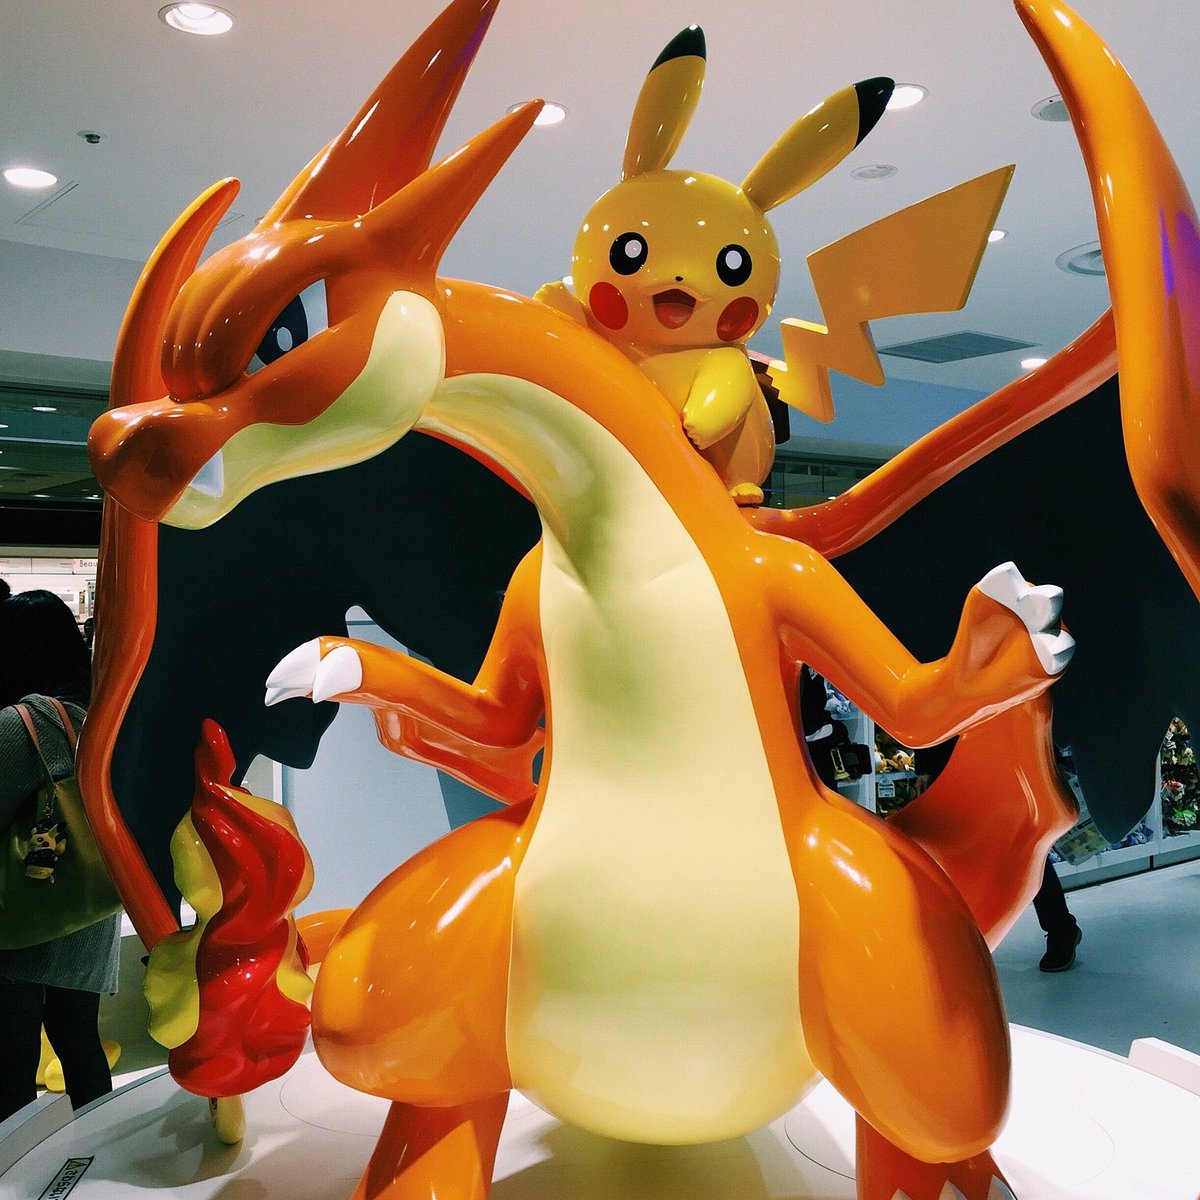 A Guide to Pokémon Center and 5 Best Pokémon Centers in Tokyo for 2022